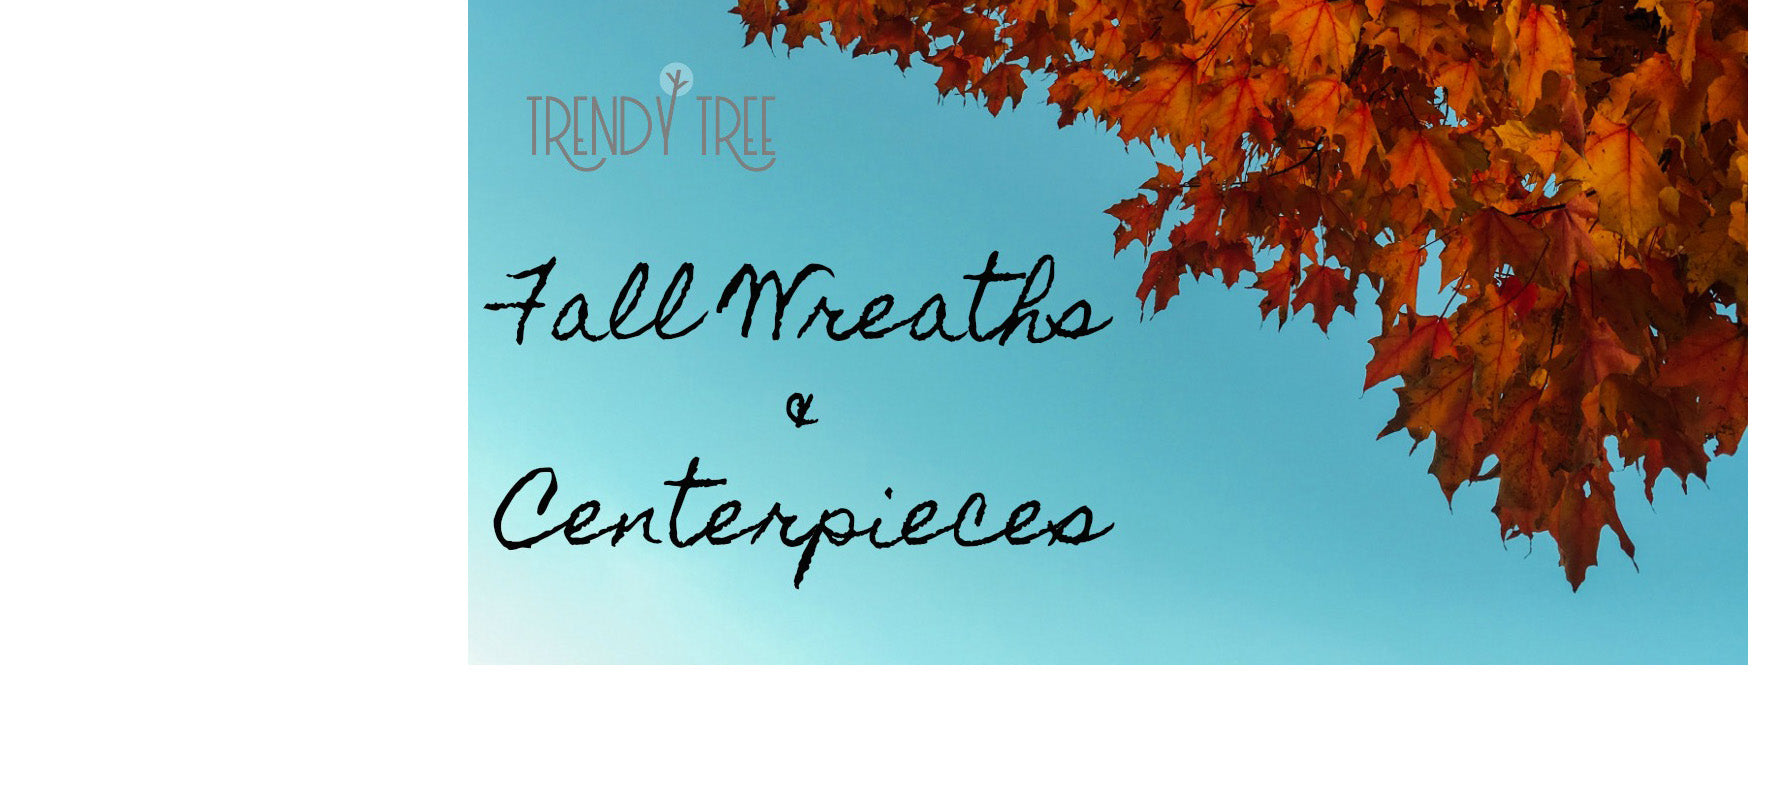 Video Featuring Fall Wreaths & Centerpieces